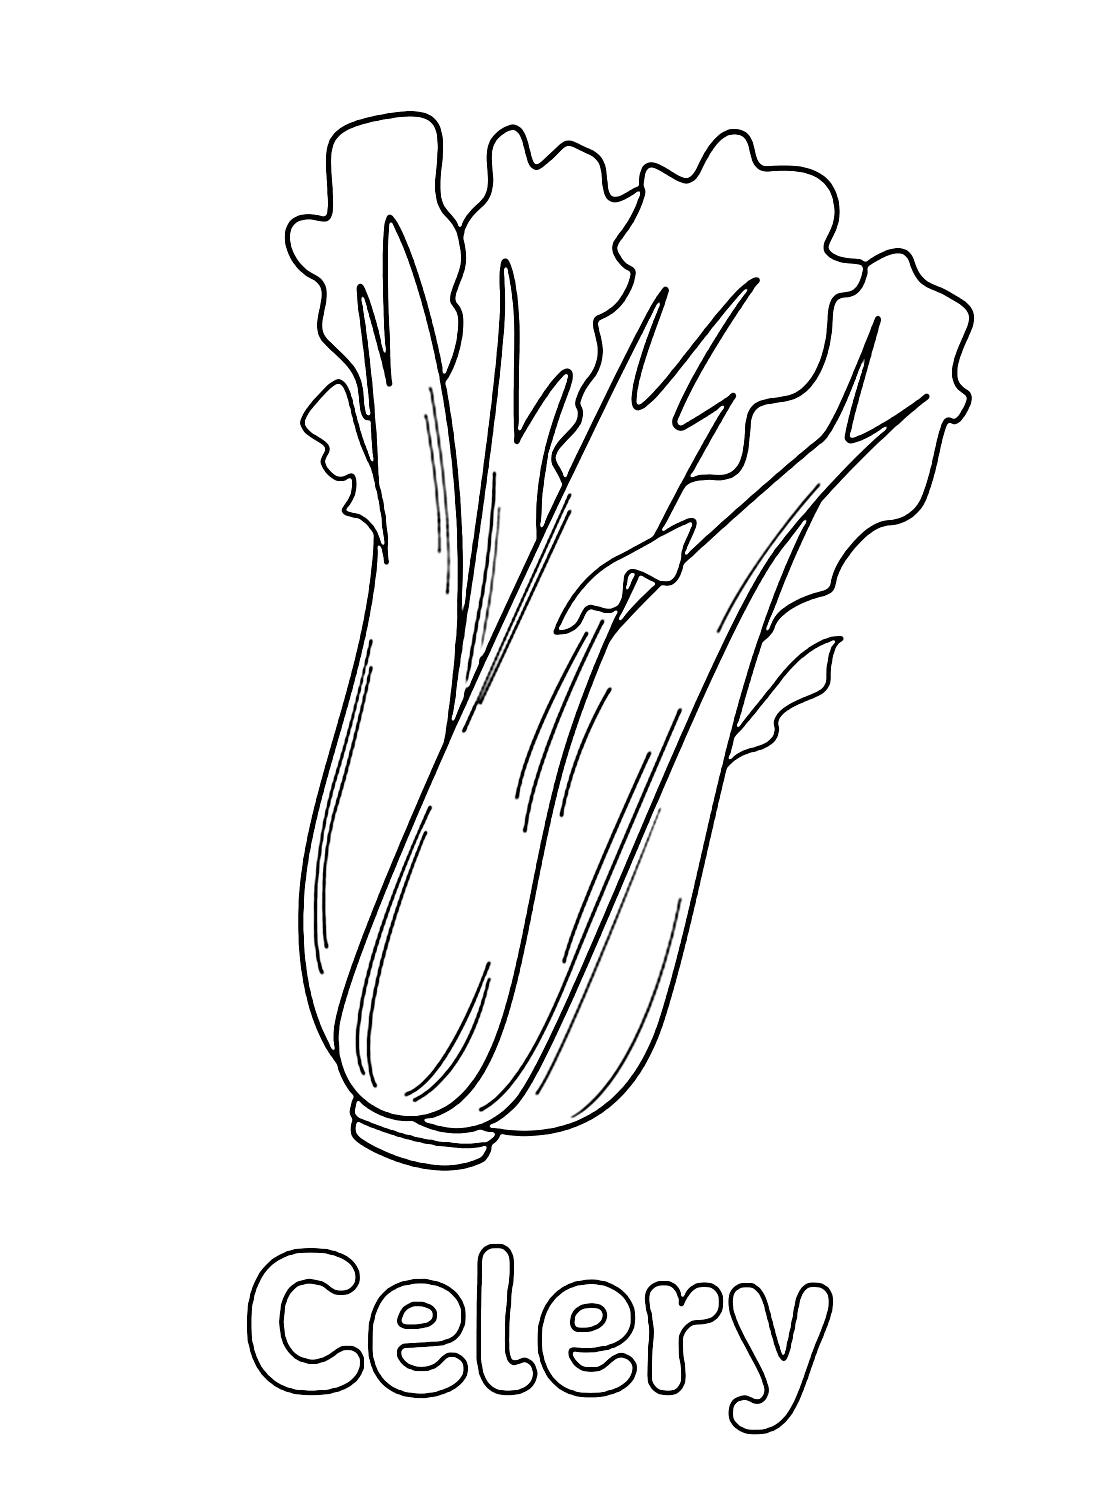 Free Coloring Page Celery from Celery